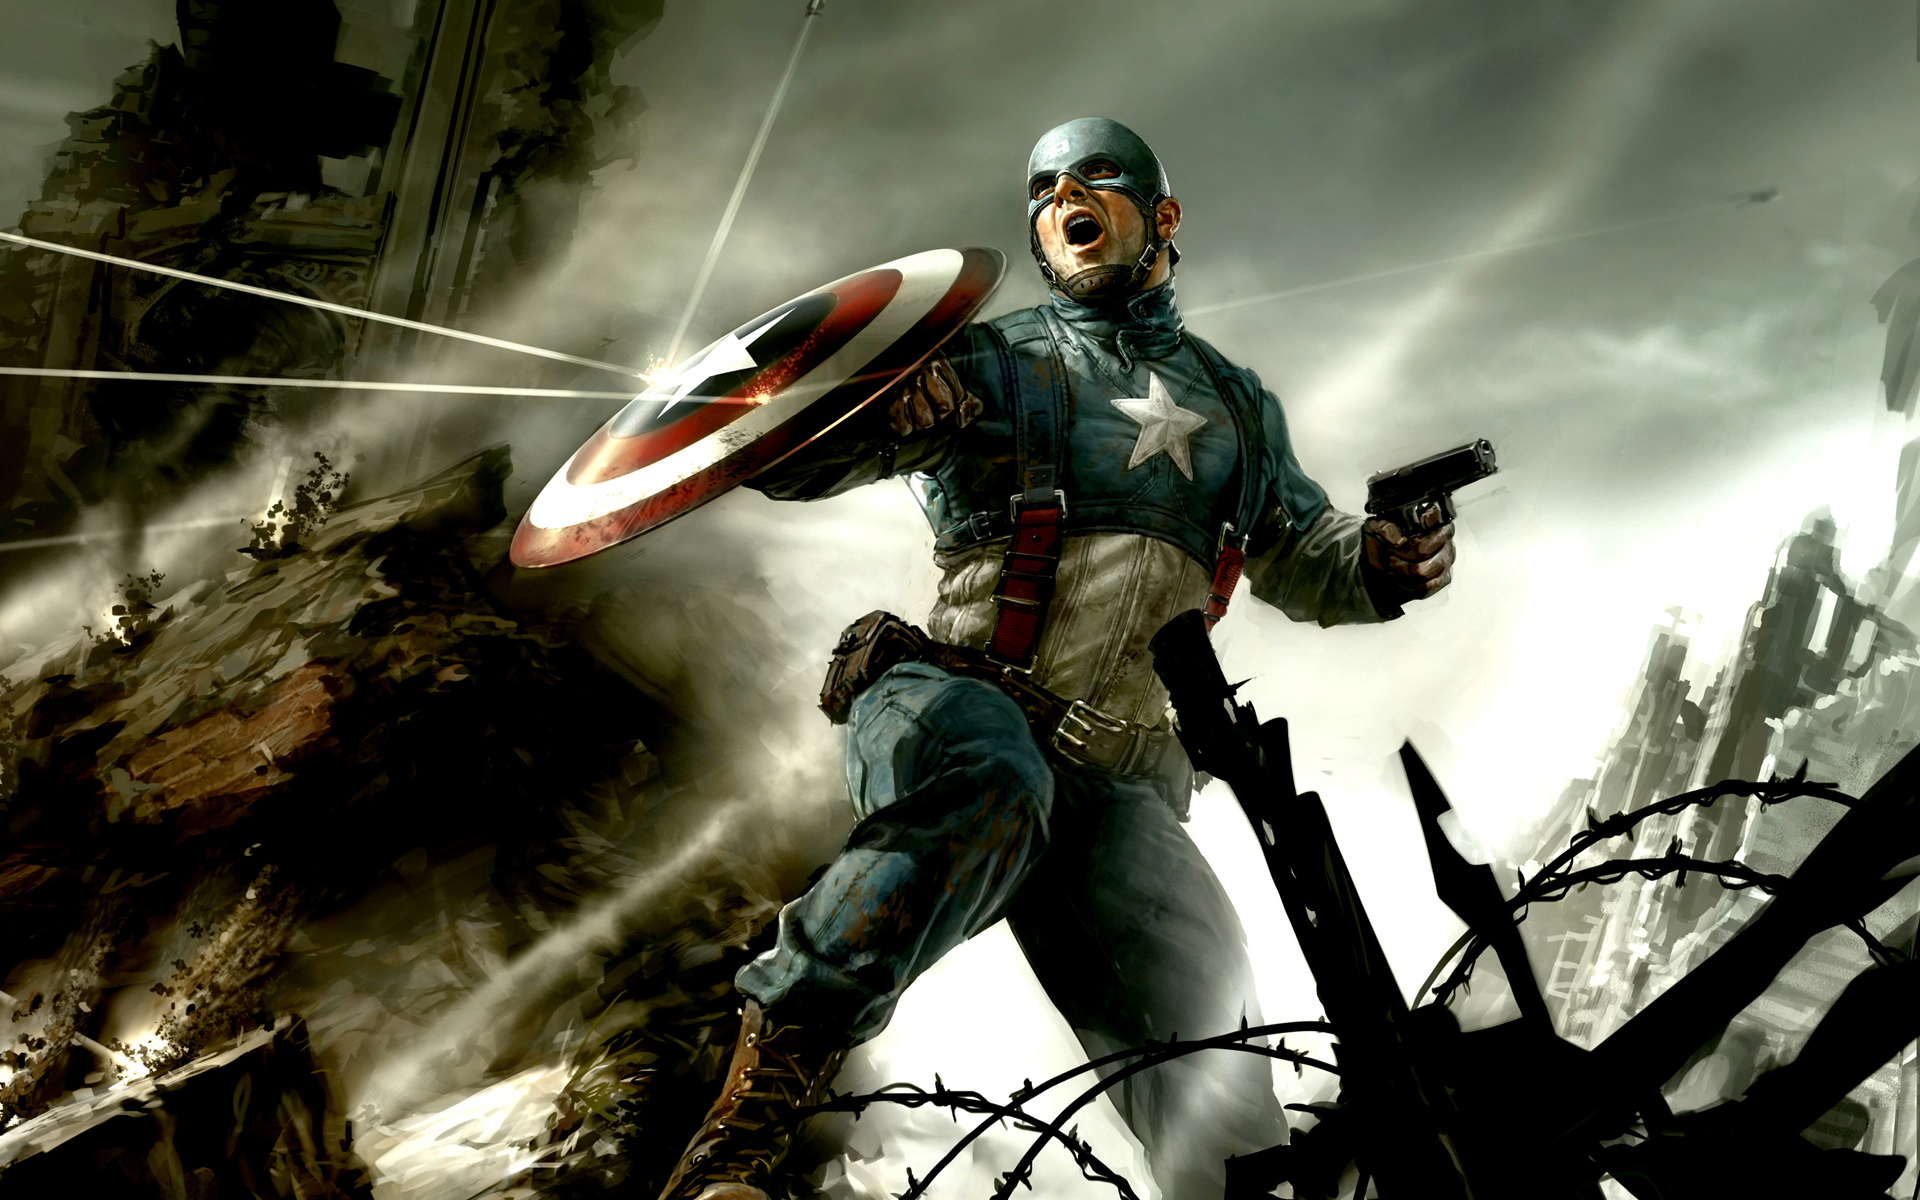 captain america hd wallpaper download,action adventure game,pc game,fictional character,cg artwork,adventure game